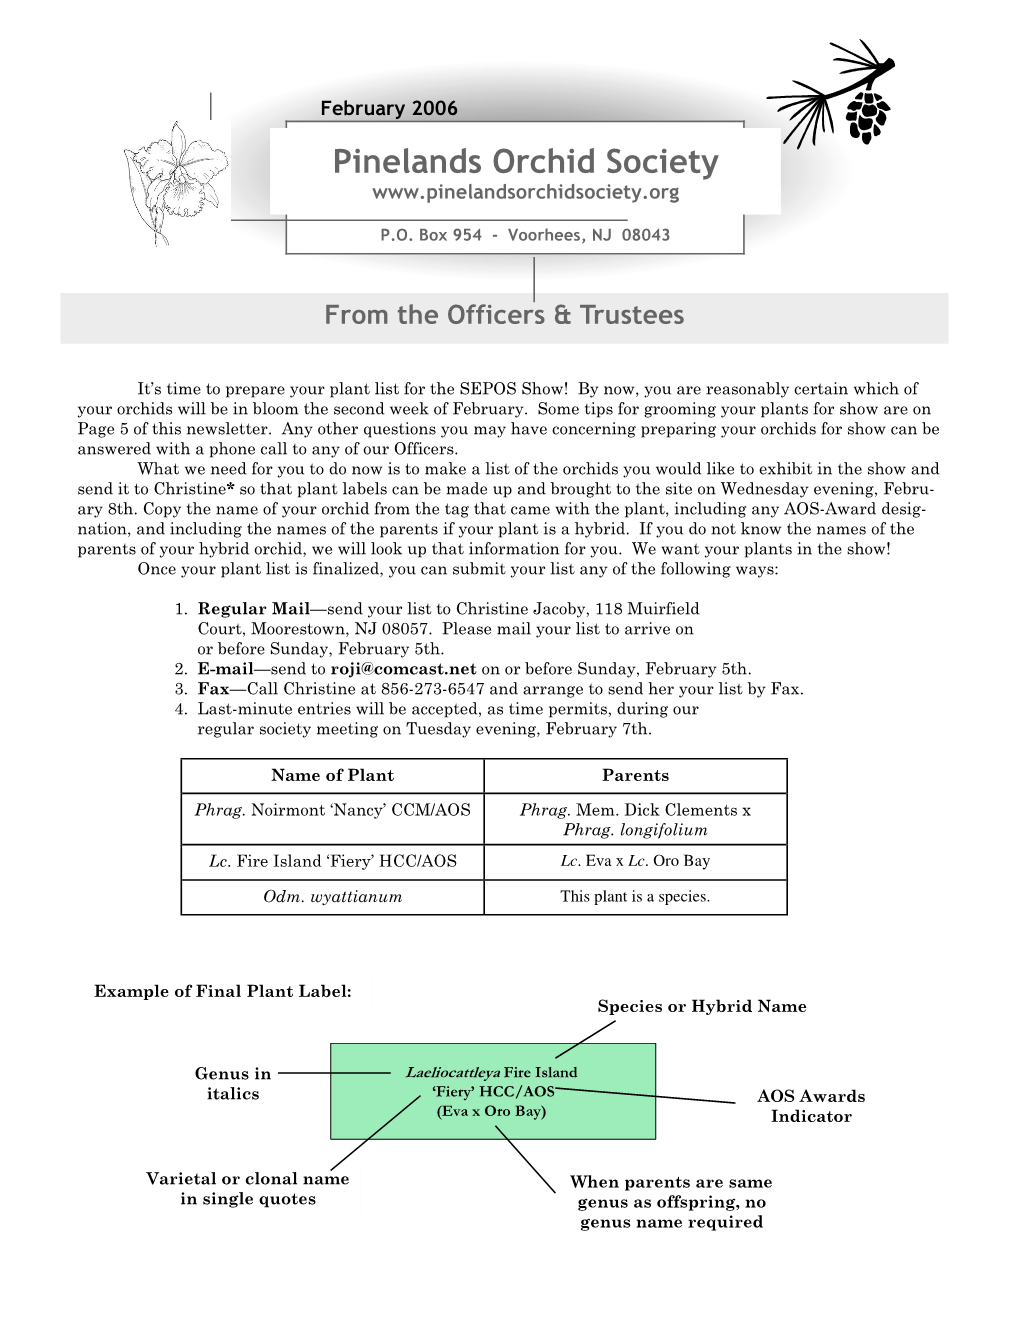 Pinelands Orchid Society Newsletter February 2006-Edited Version.Pub